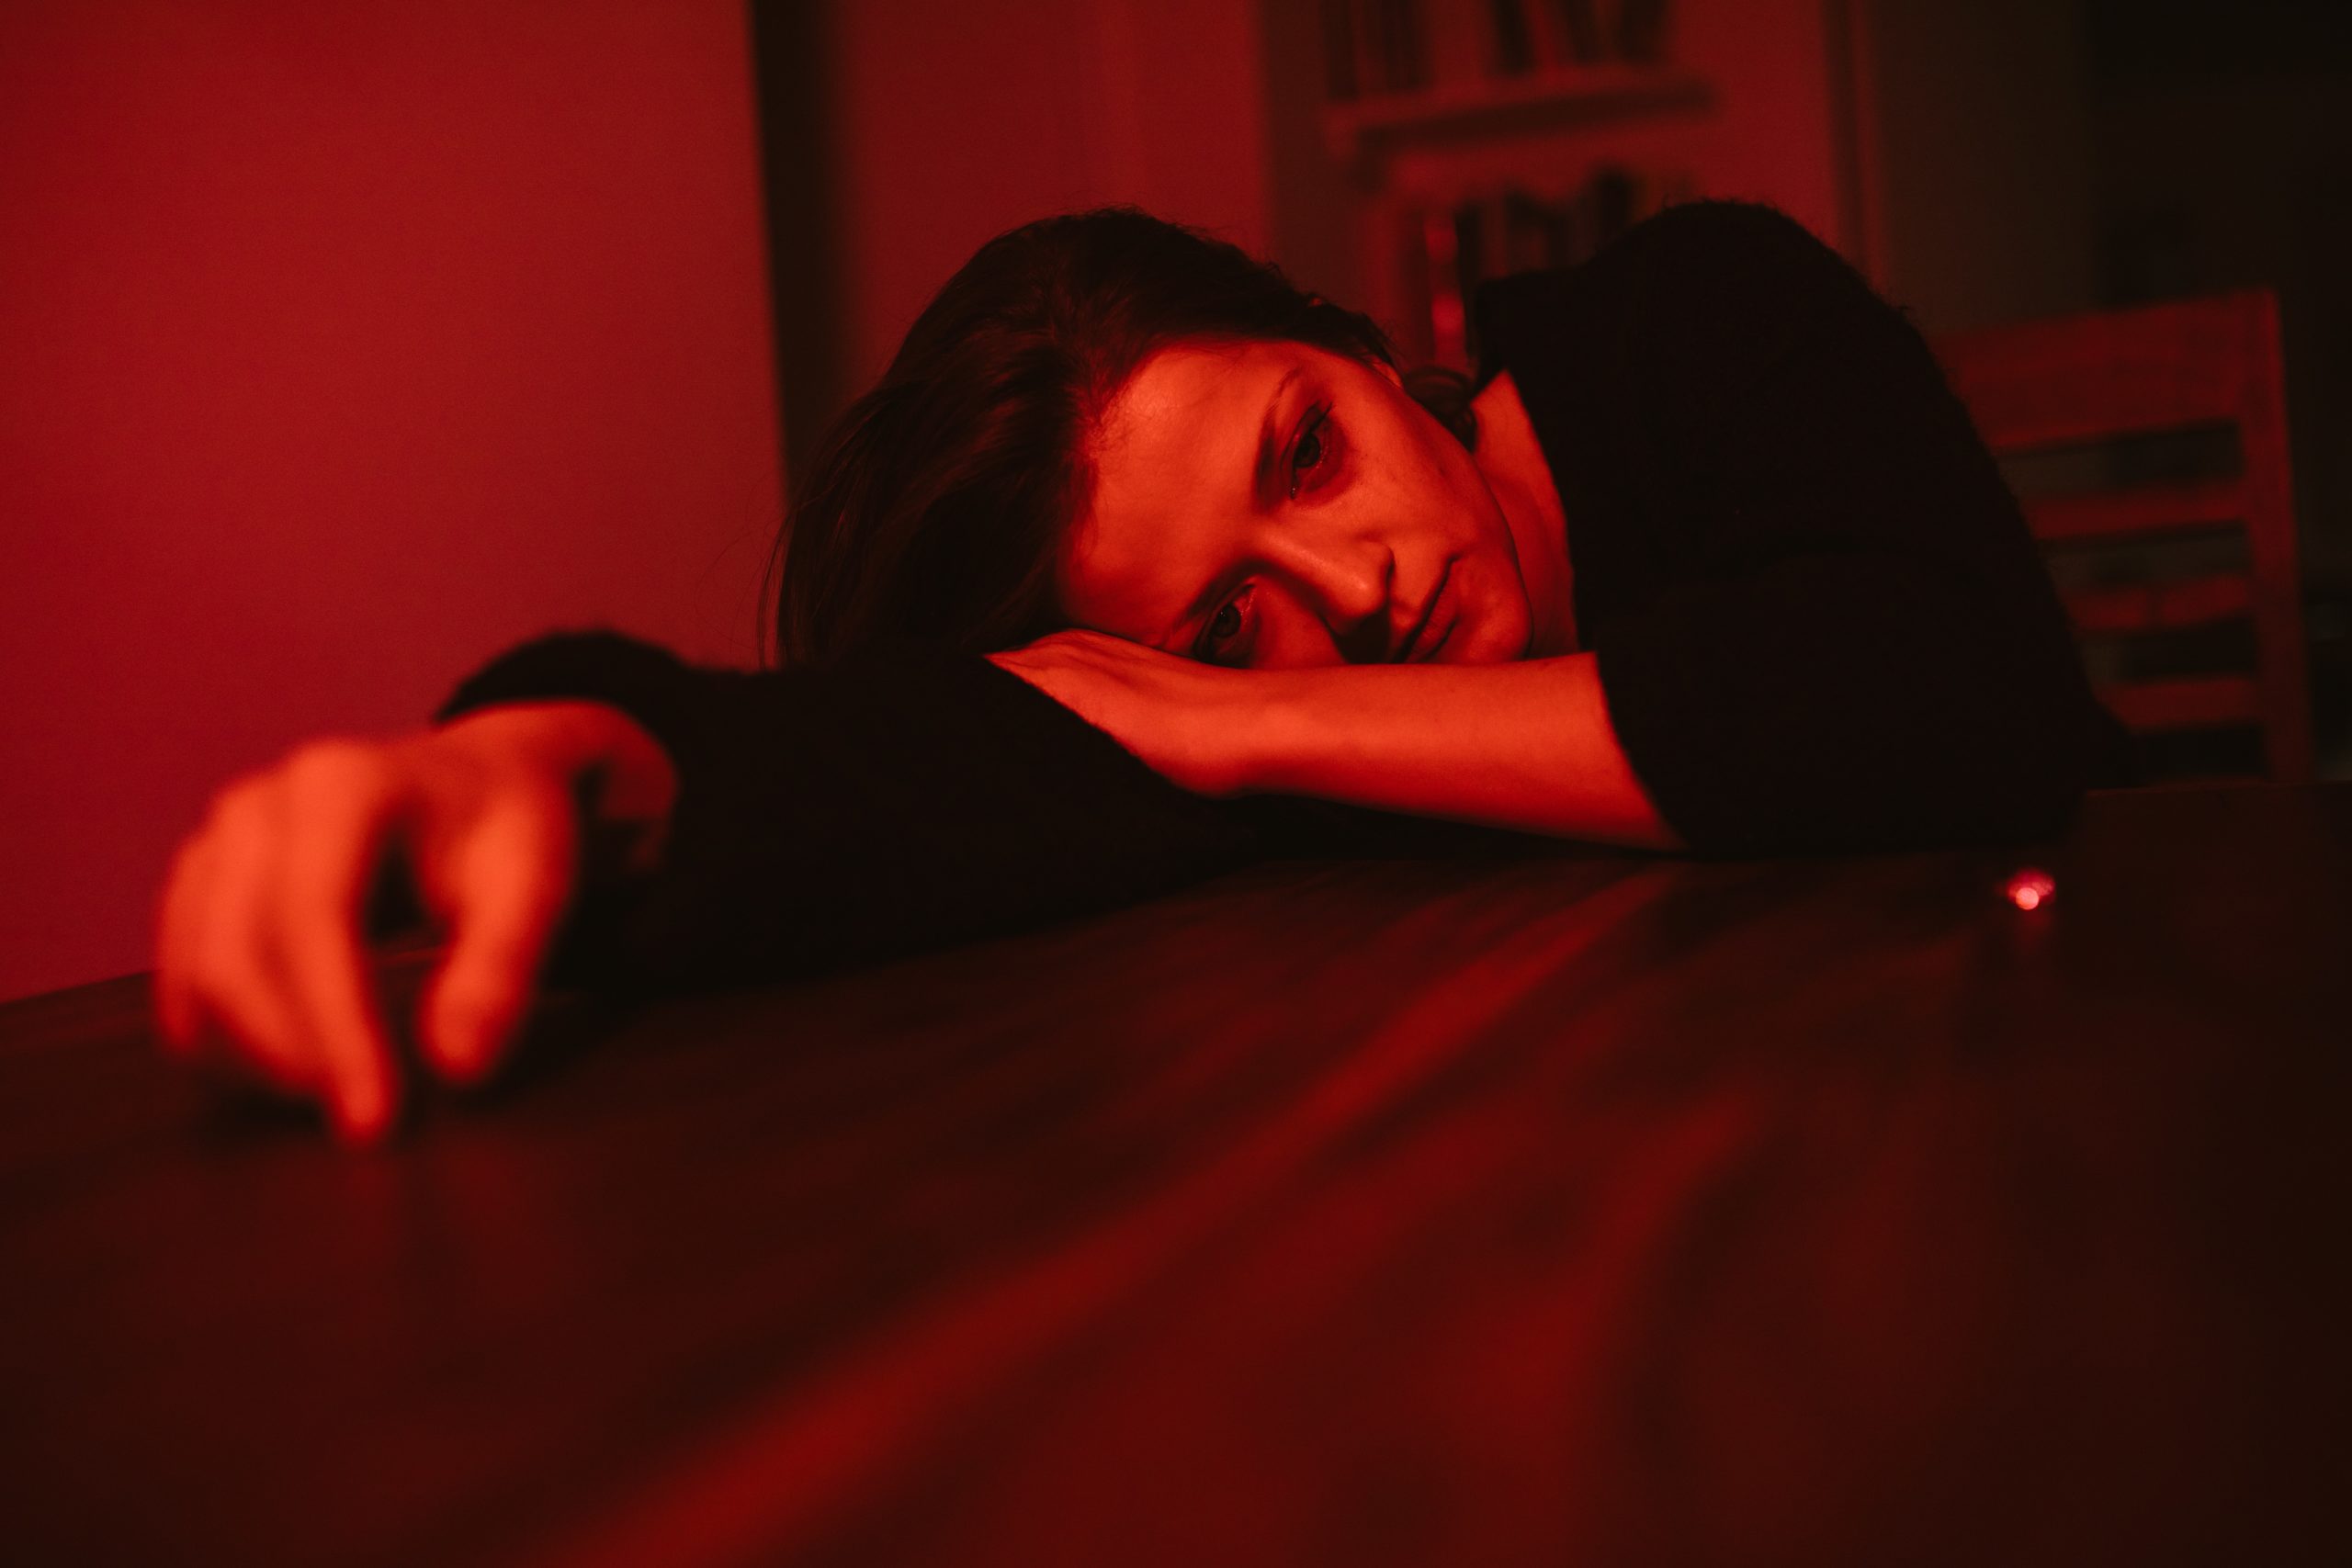 A red-lit image of a woman, crying, laying on her arm on a table.